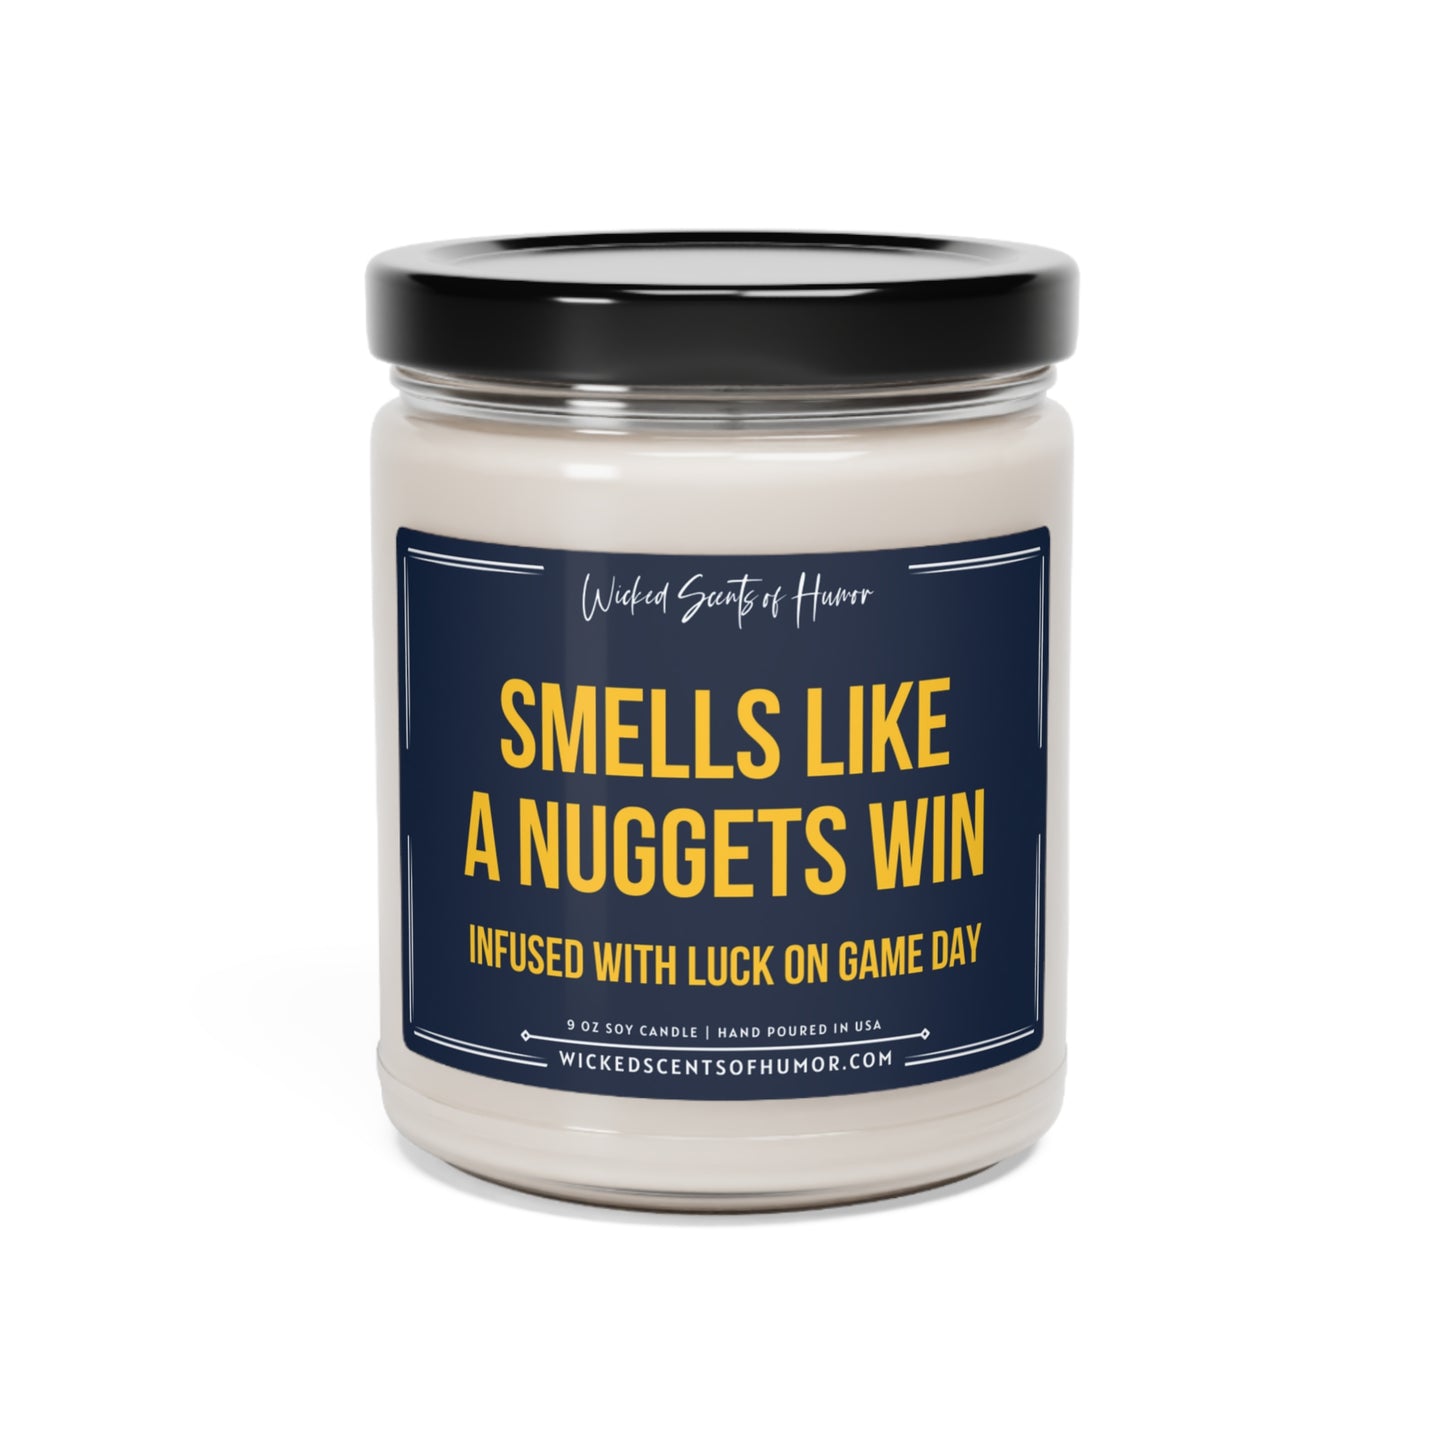 Smells Like Denver Nuggets Candle, Basketball NBA Candle, Nuggets Inspired, Game Day Decor, Unique Gift Idea, Sport Themed Candle